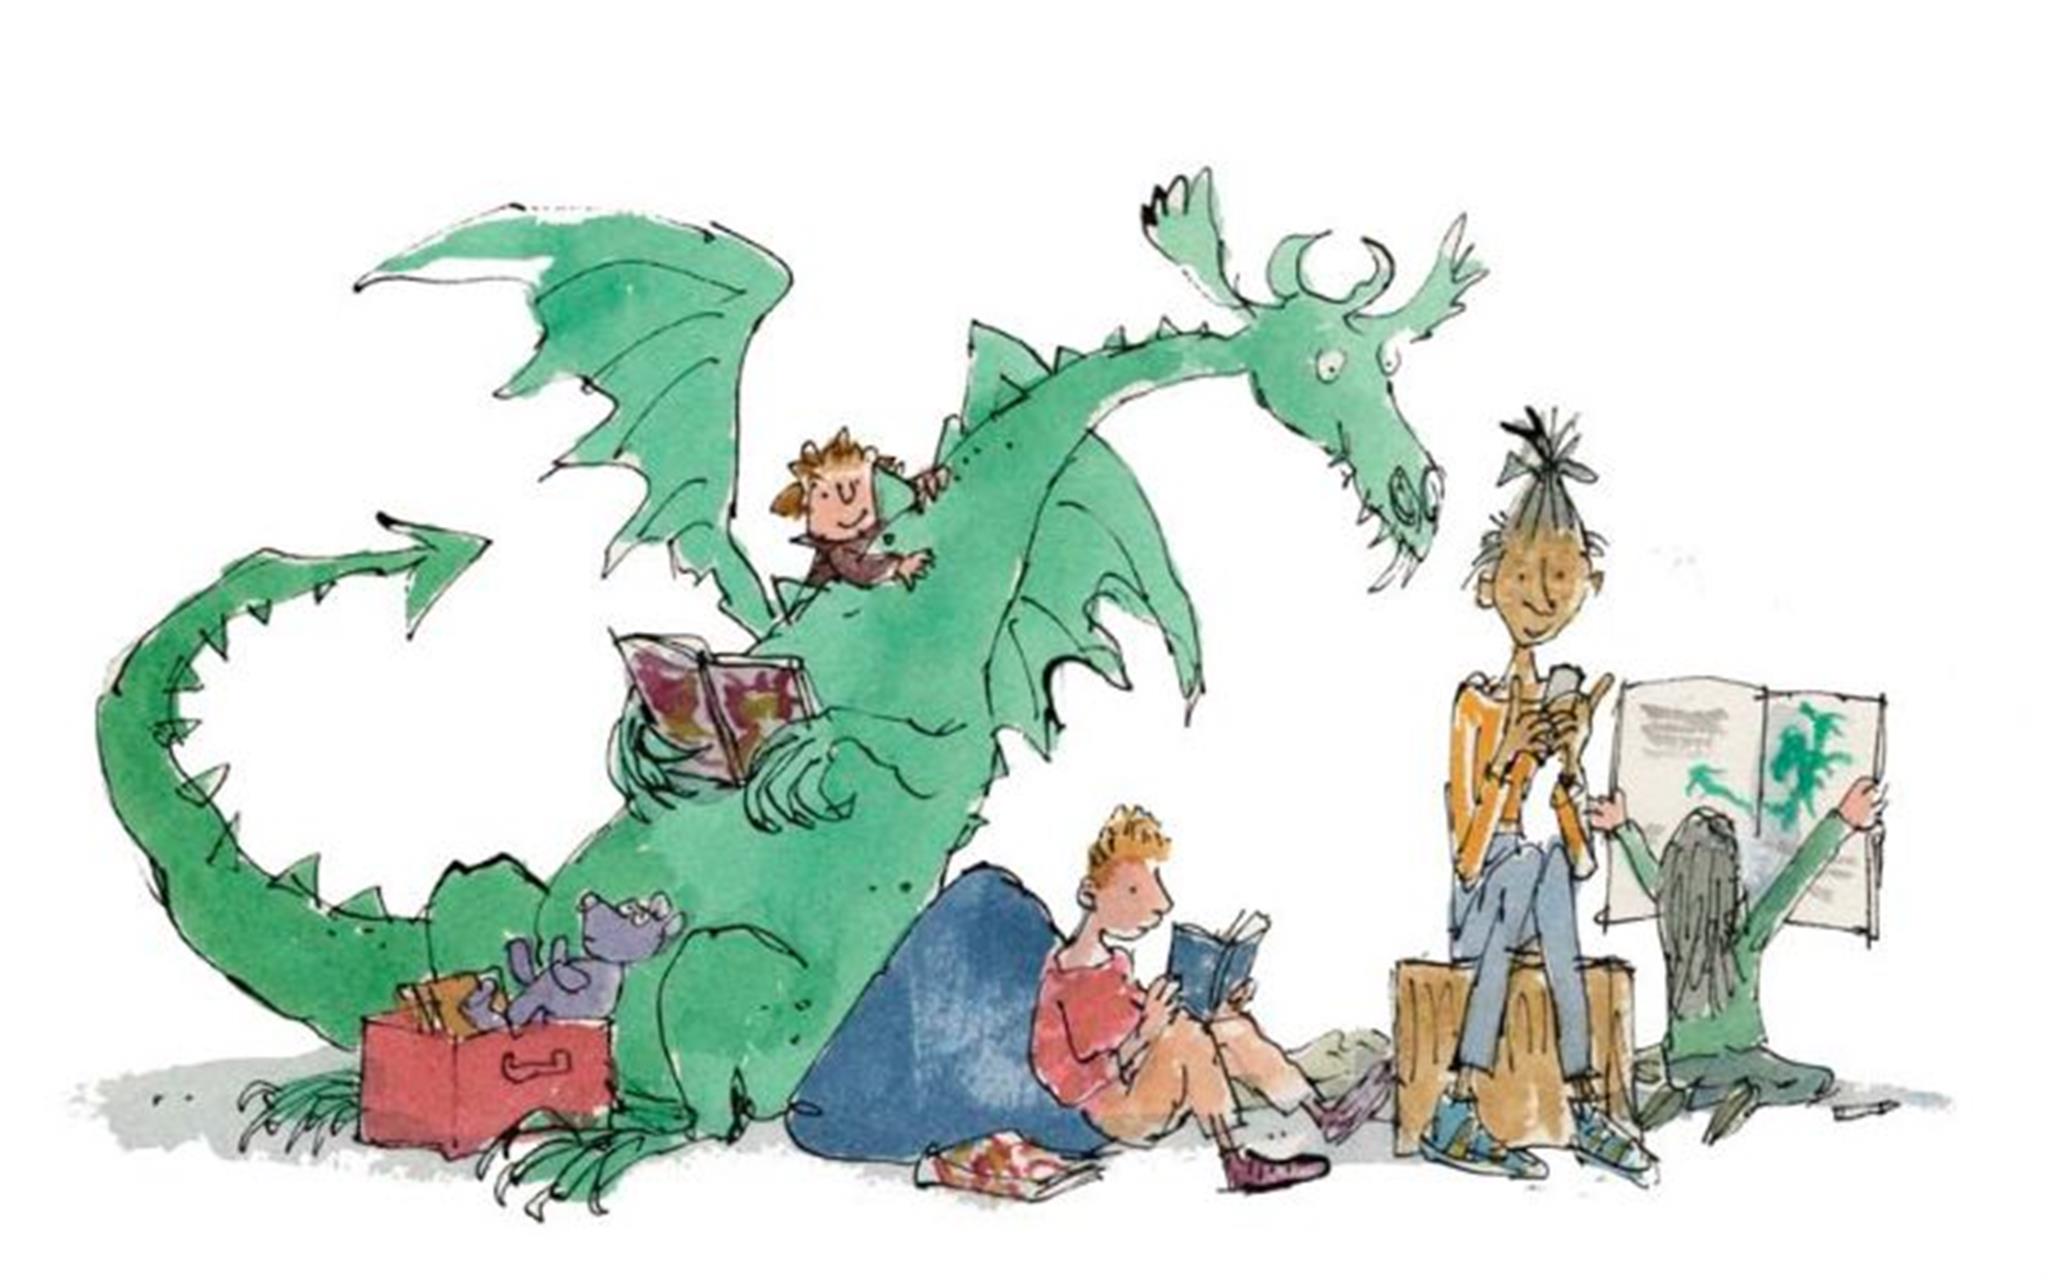 Quentin Blake: The Illustrated Hospital